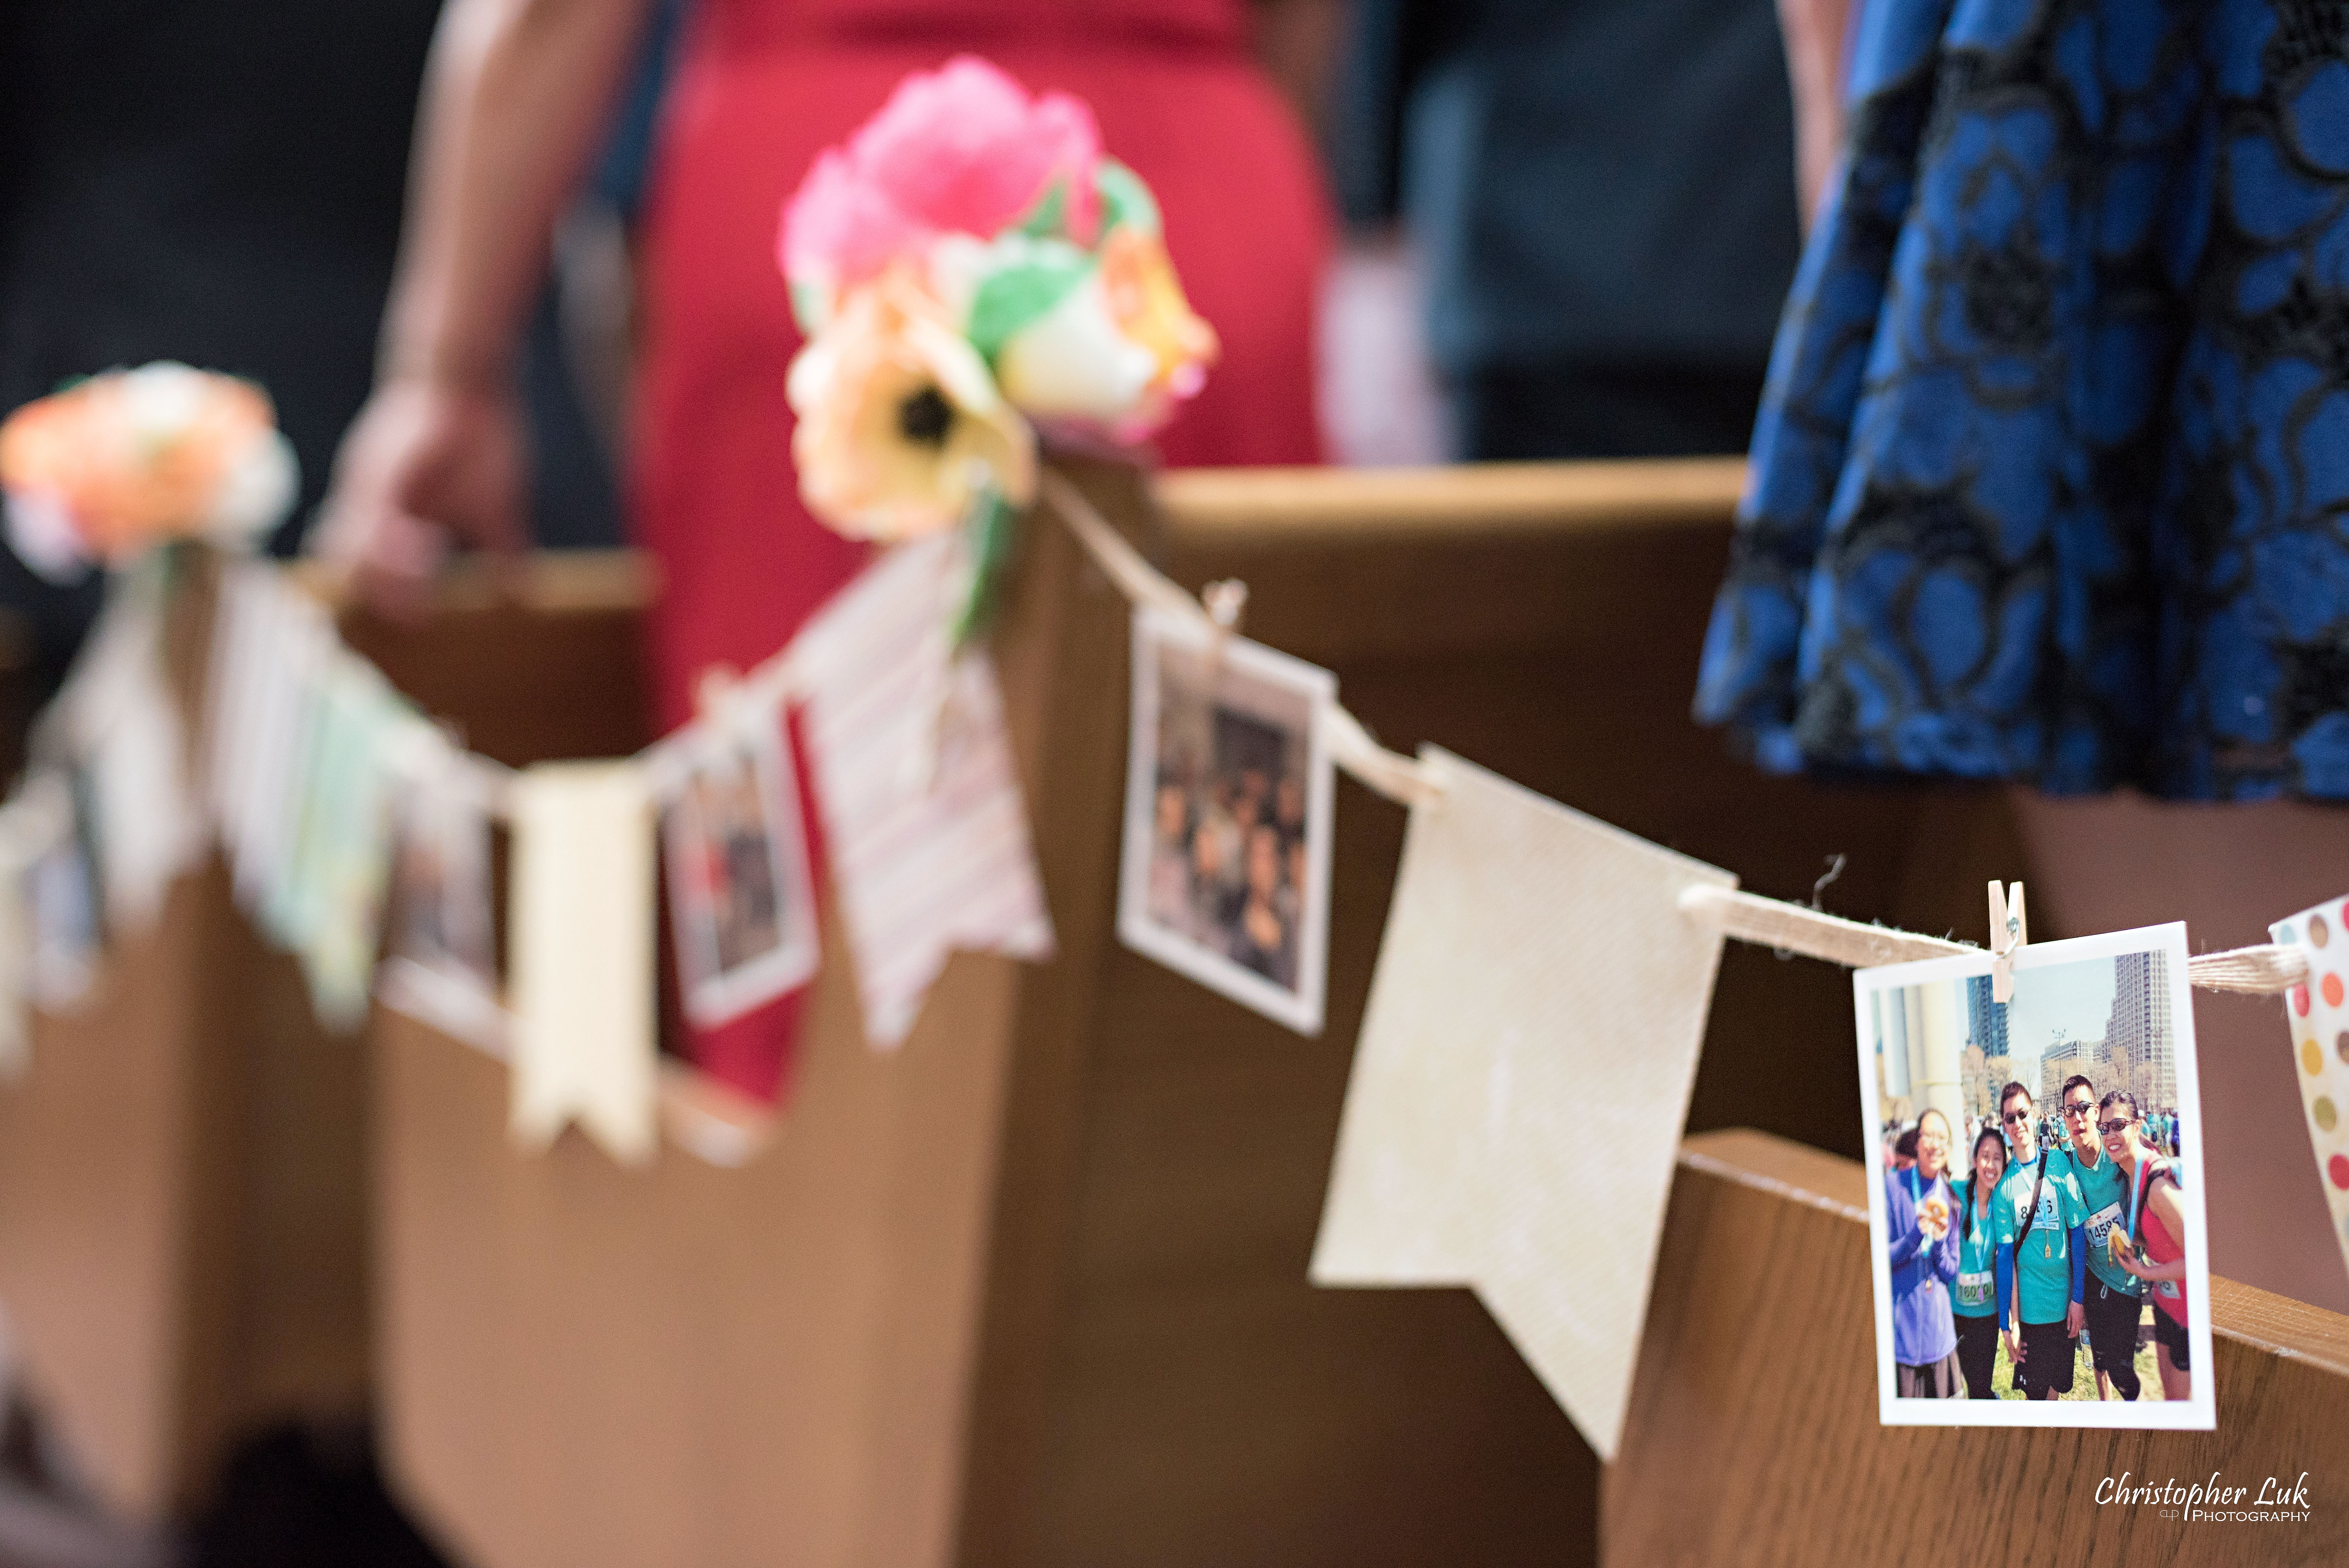 Christopher Luk - Toronto Wedding Photographer - Markham Chinese Baptist Church MCBC Christian Ceremony - Natural Candid Photojournalistic Bride Groom Relationship Flags Photos Prints String Clothespins Rustic Vintage Memories Decor